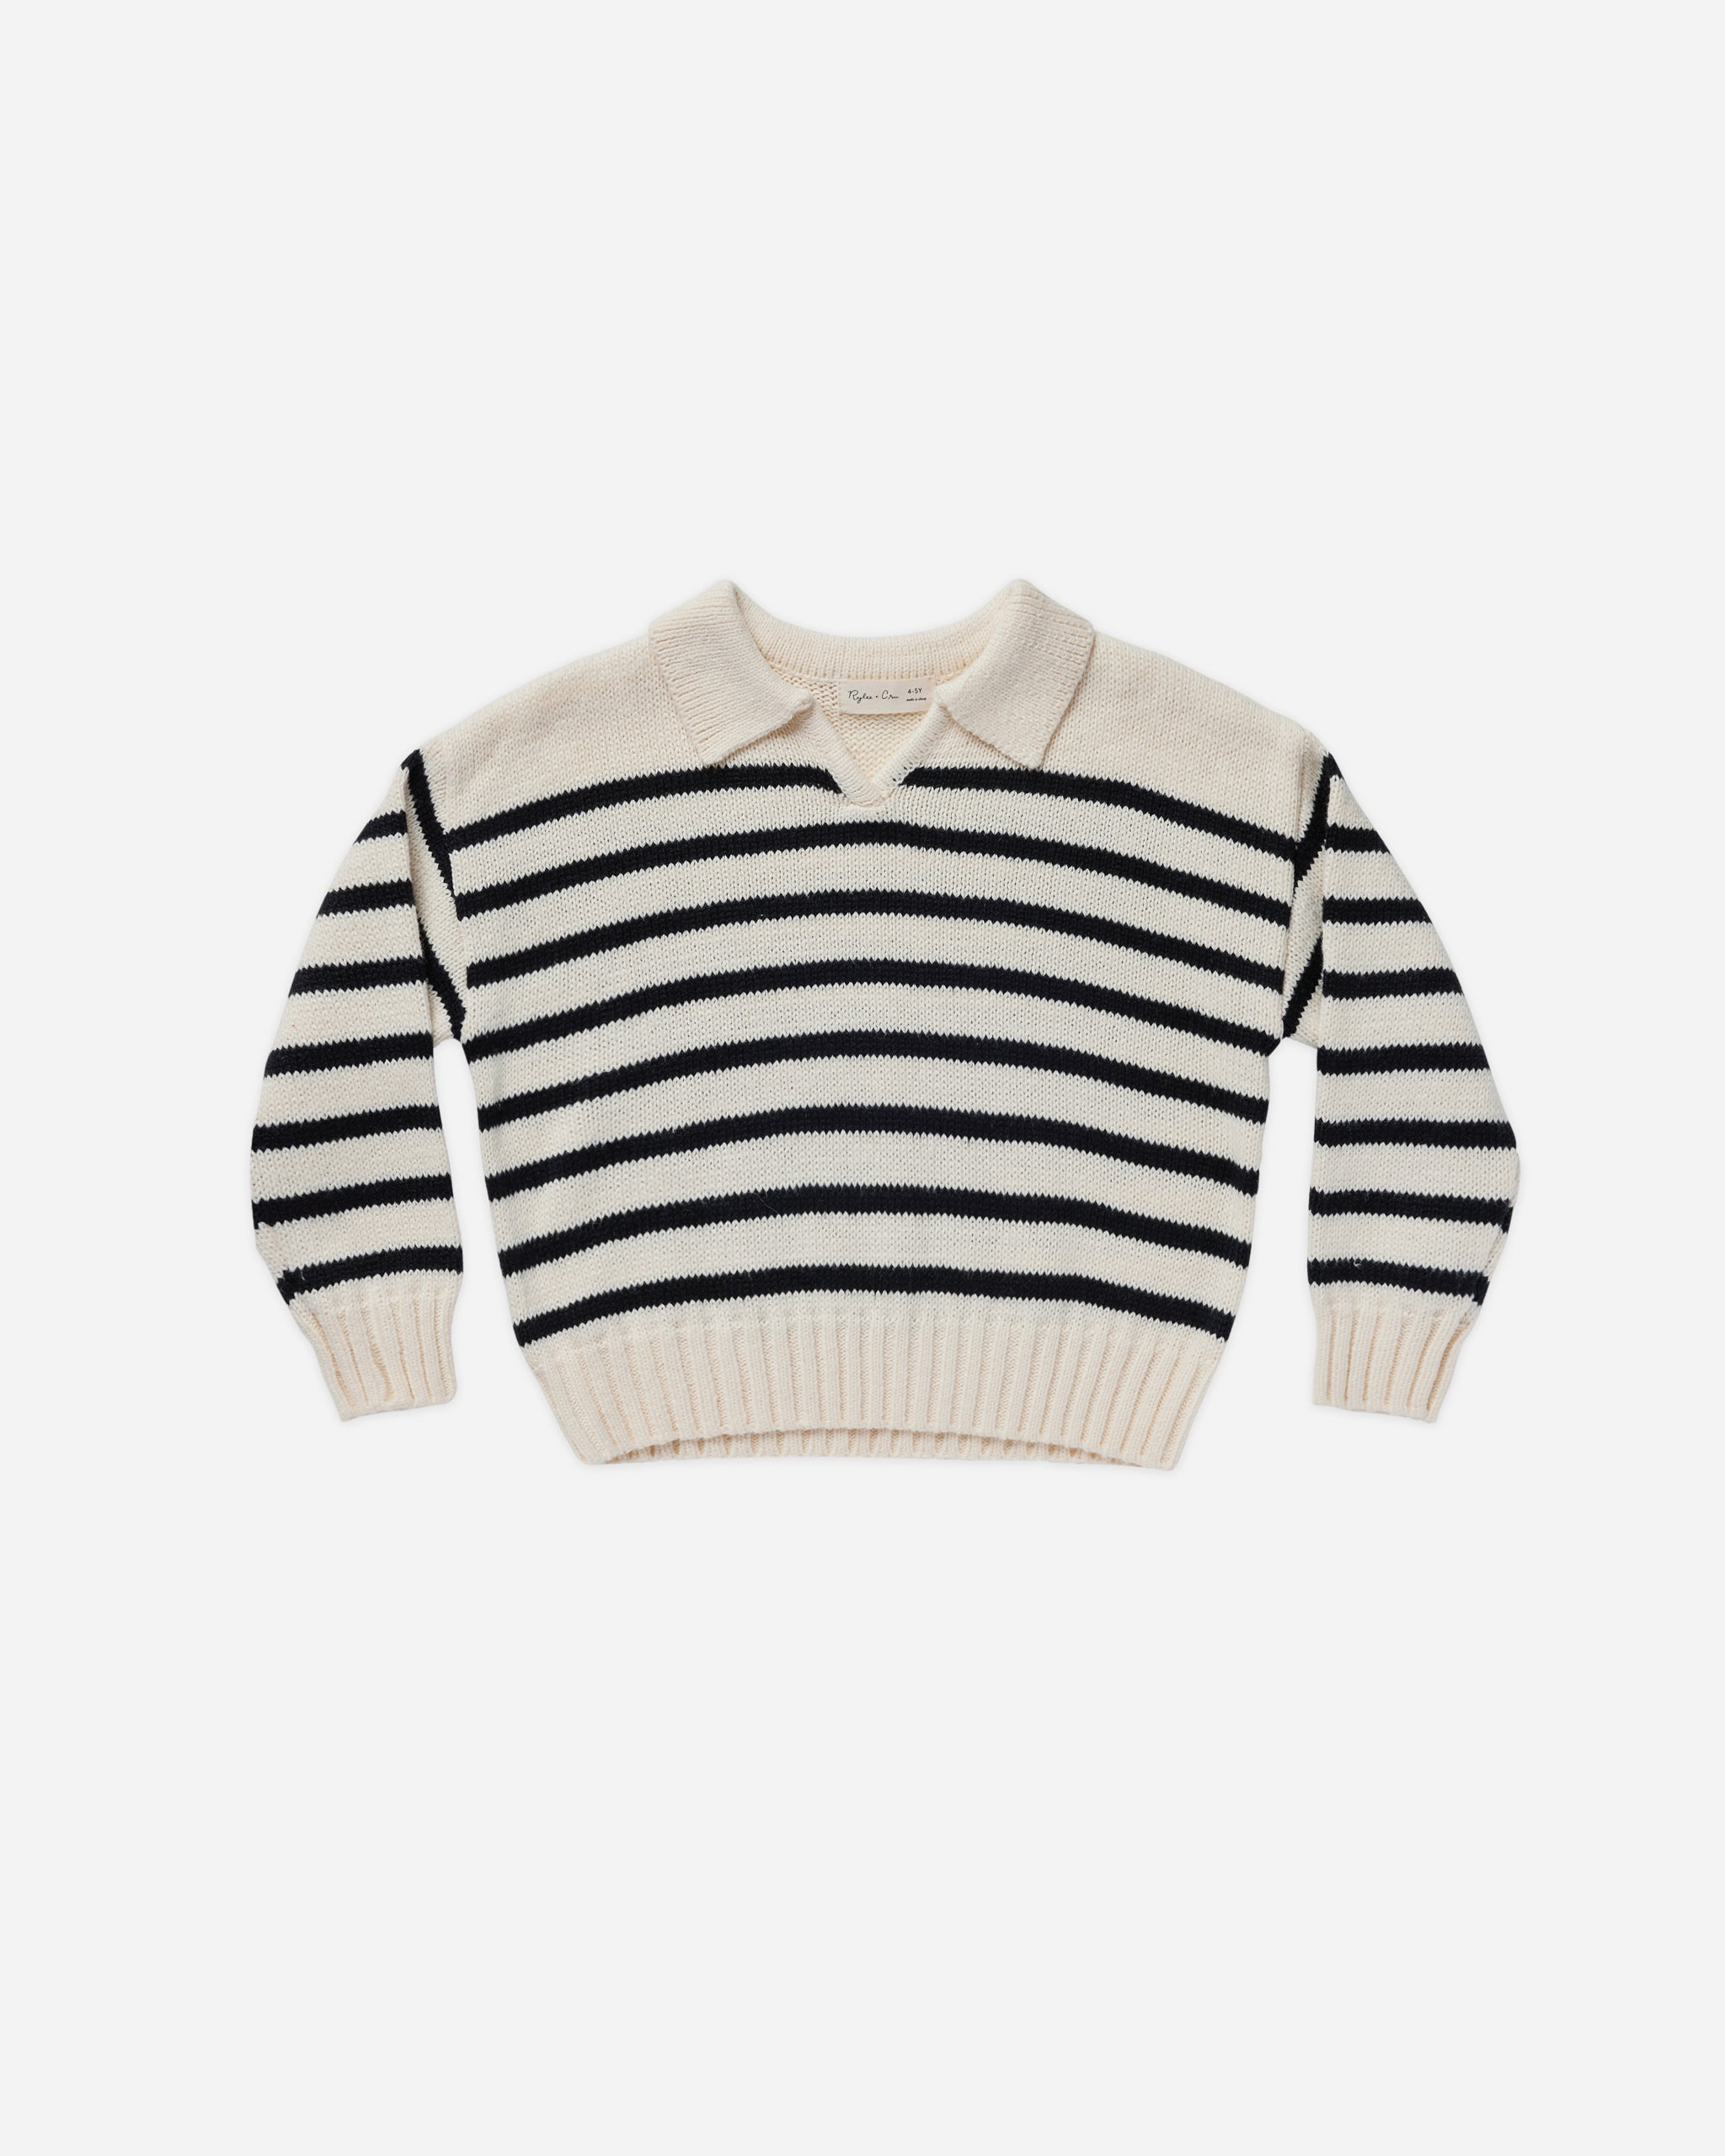 Collared Sweater || Black Stripe - Rylee + Cru | Kids Clothes | Trendy Baby Clothes | Modern Infant Outfits |